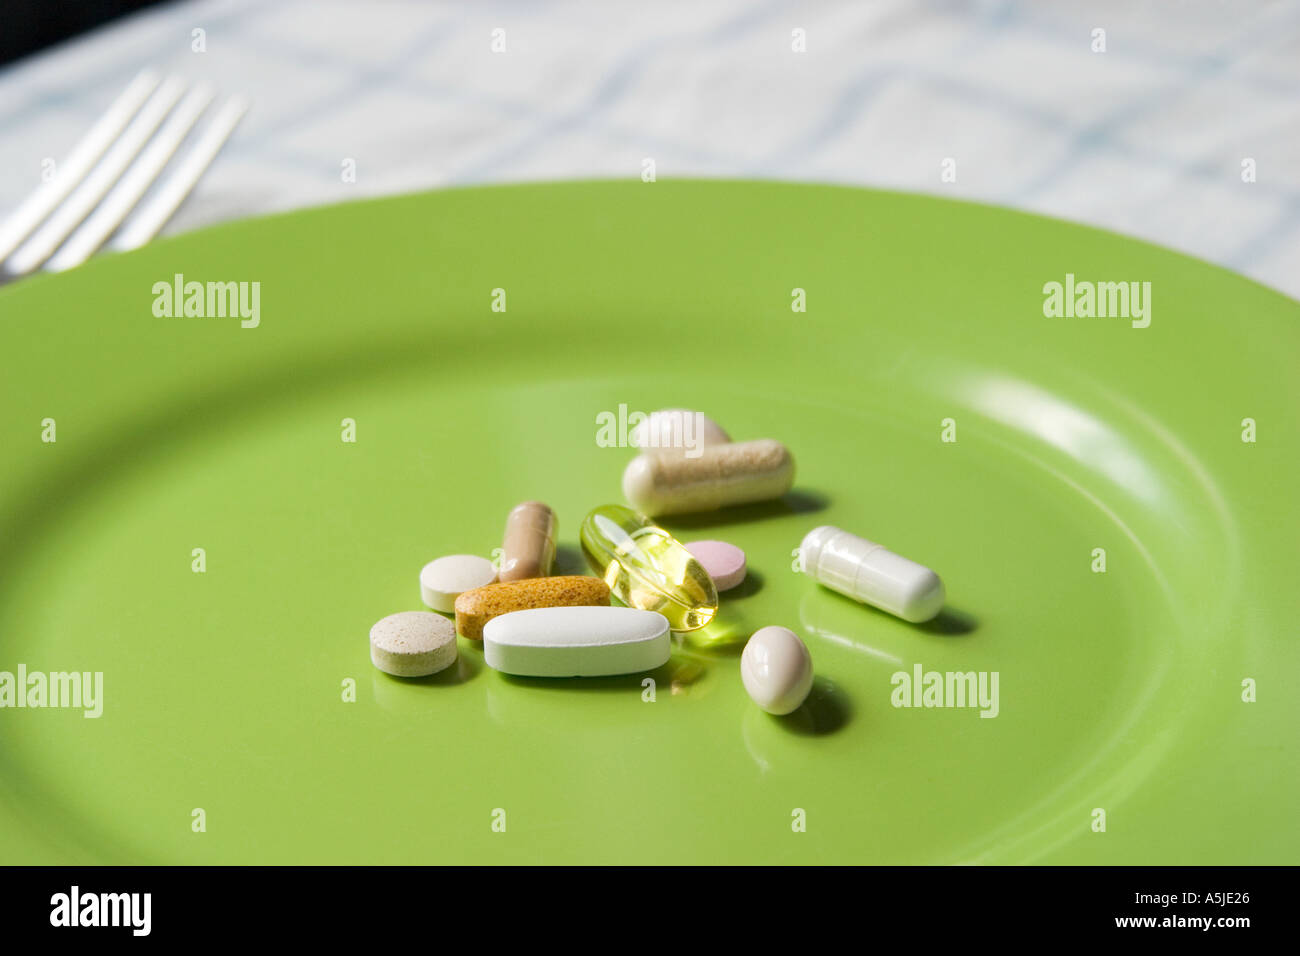 vitamins supplements lying on plate table setting nutrition good health Stock Photo